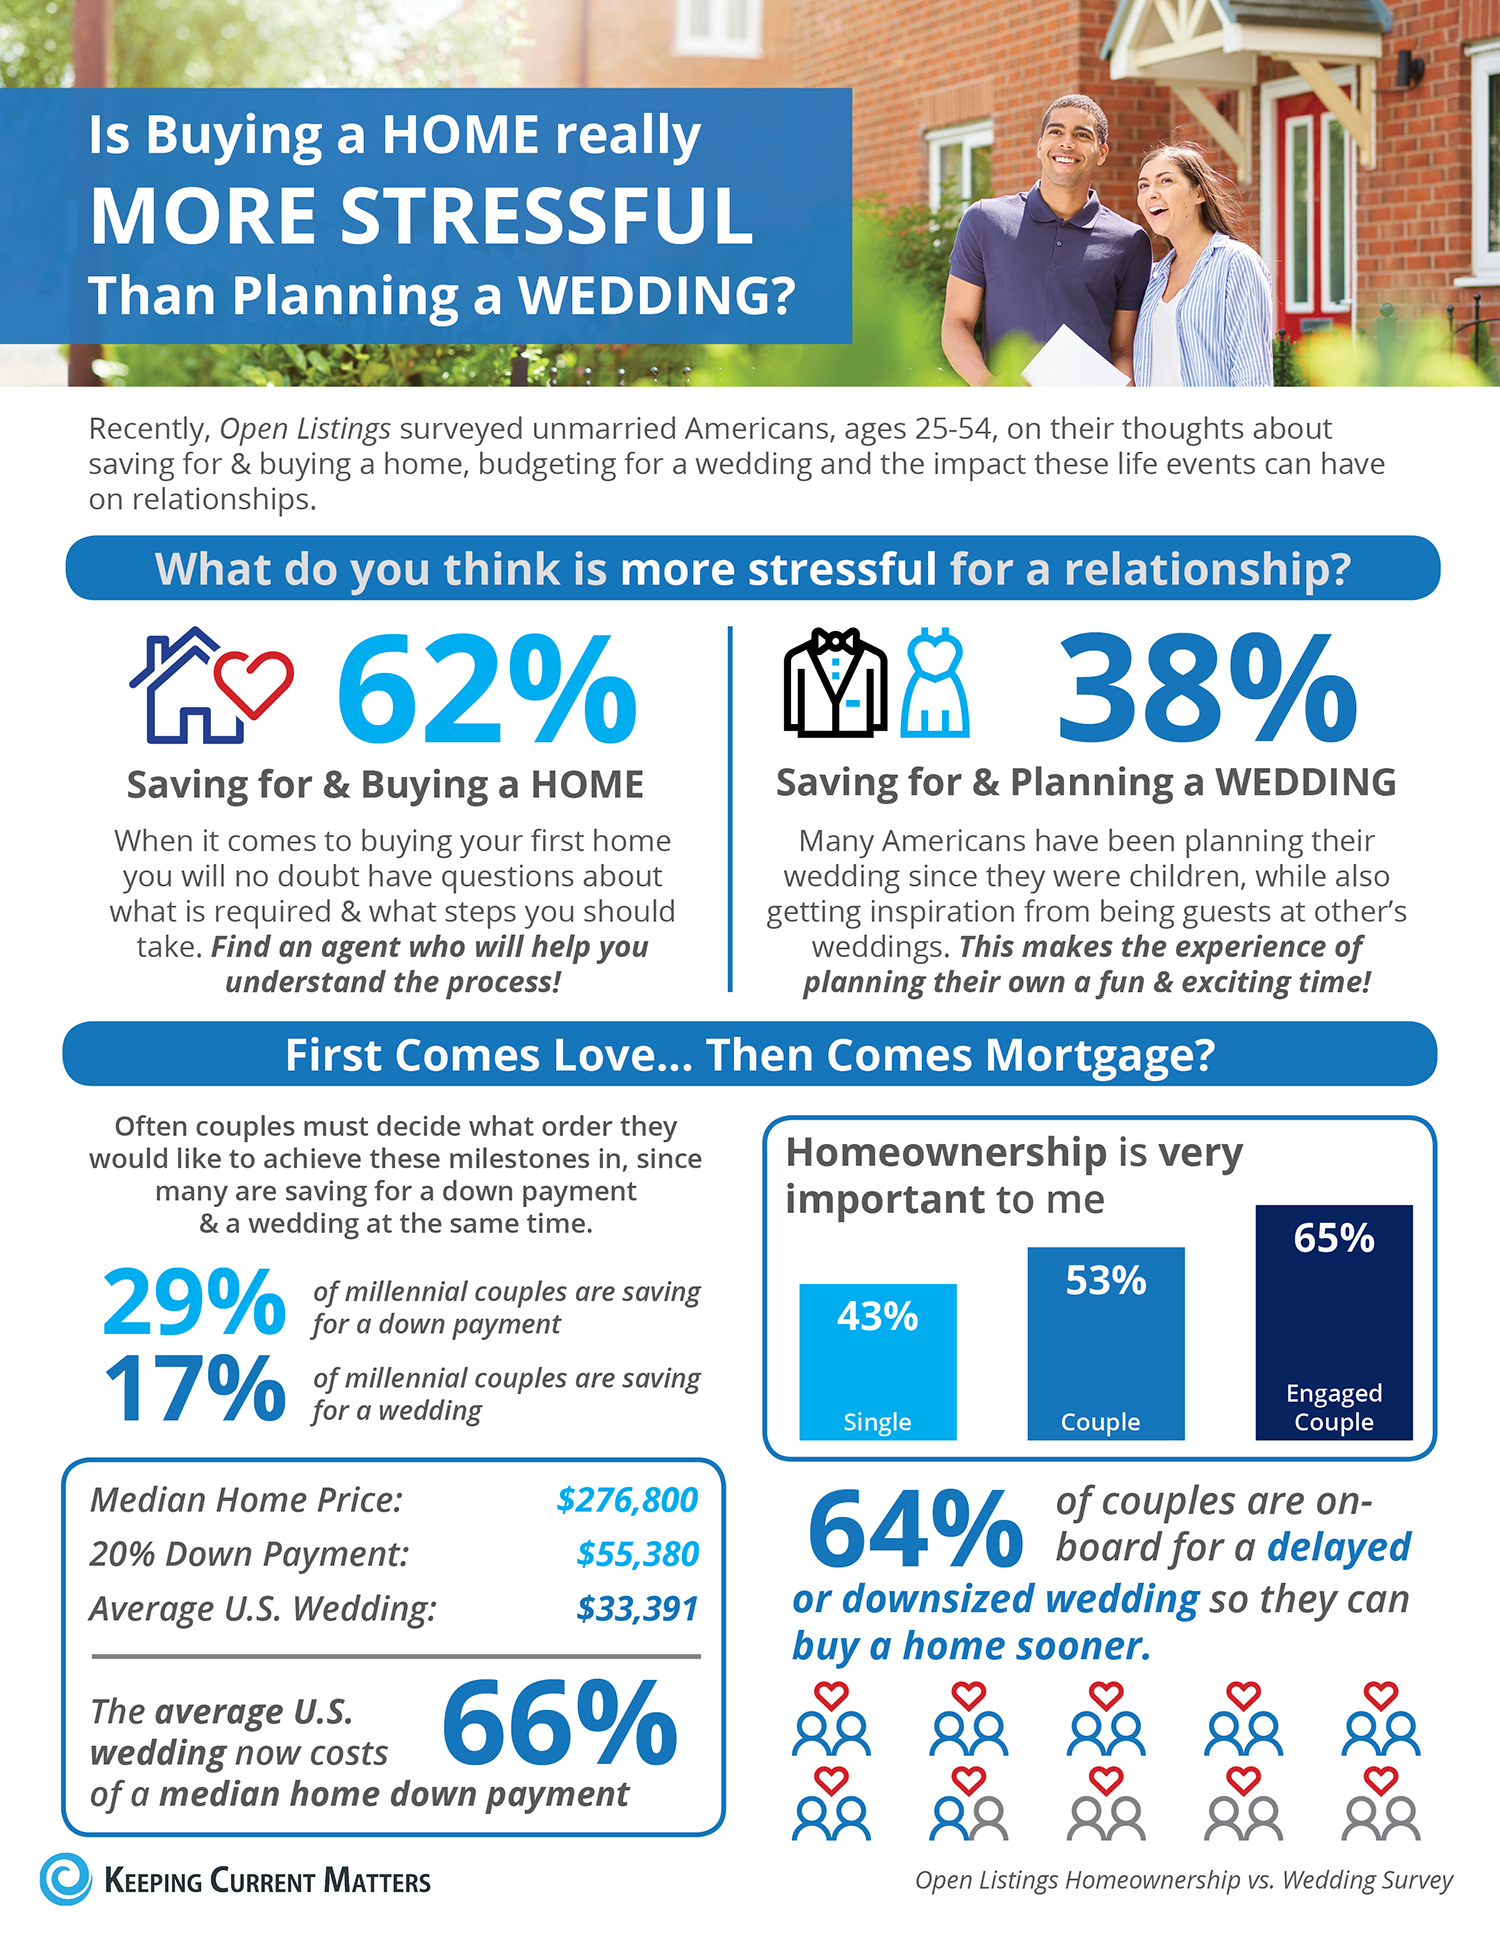 Buying a Home vs. Planning a Wedding